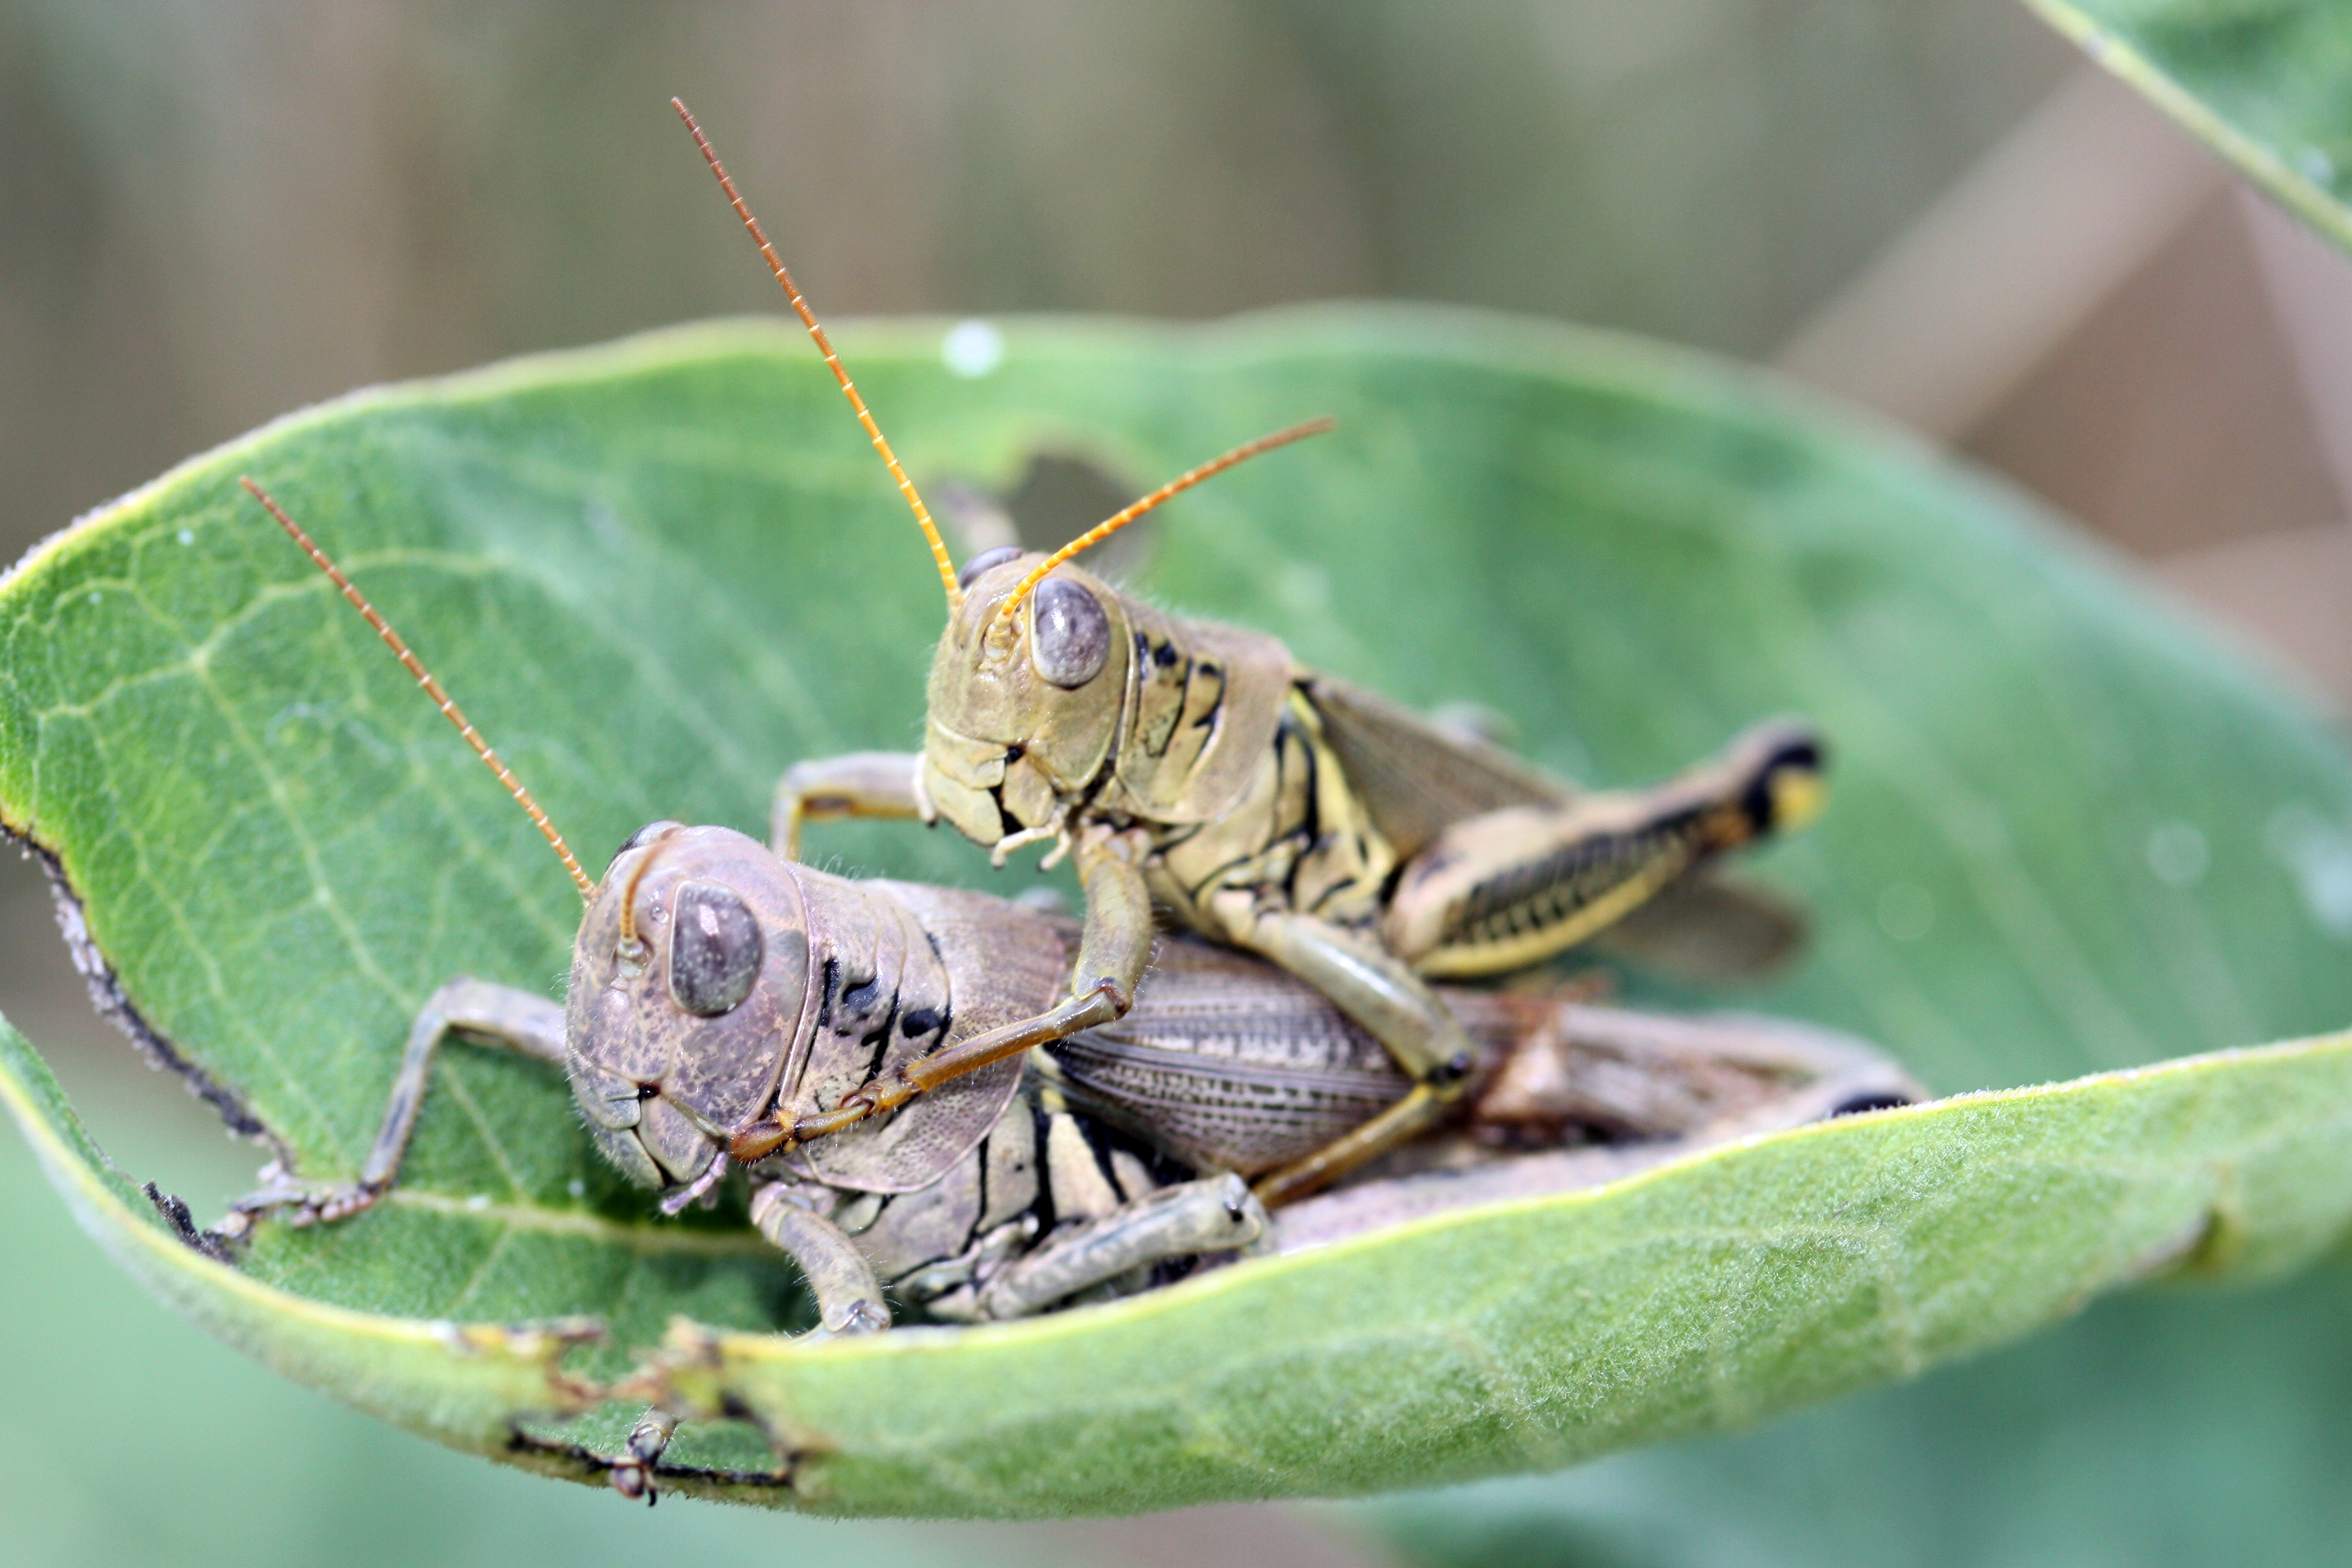 File:Grasshoppers mating.jpg - Wikimedia Commons